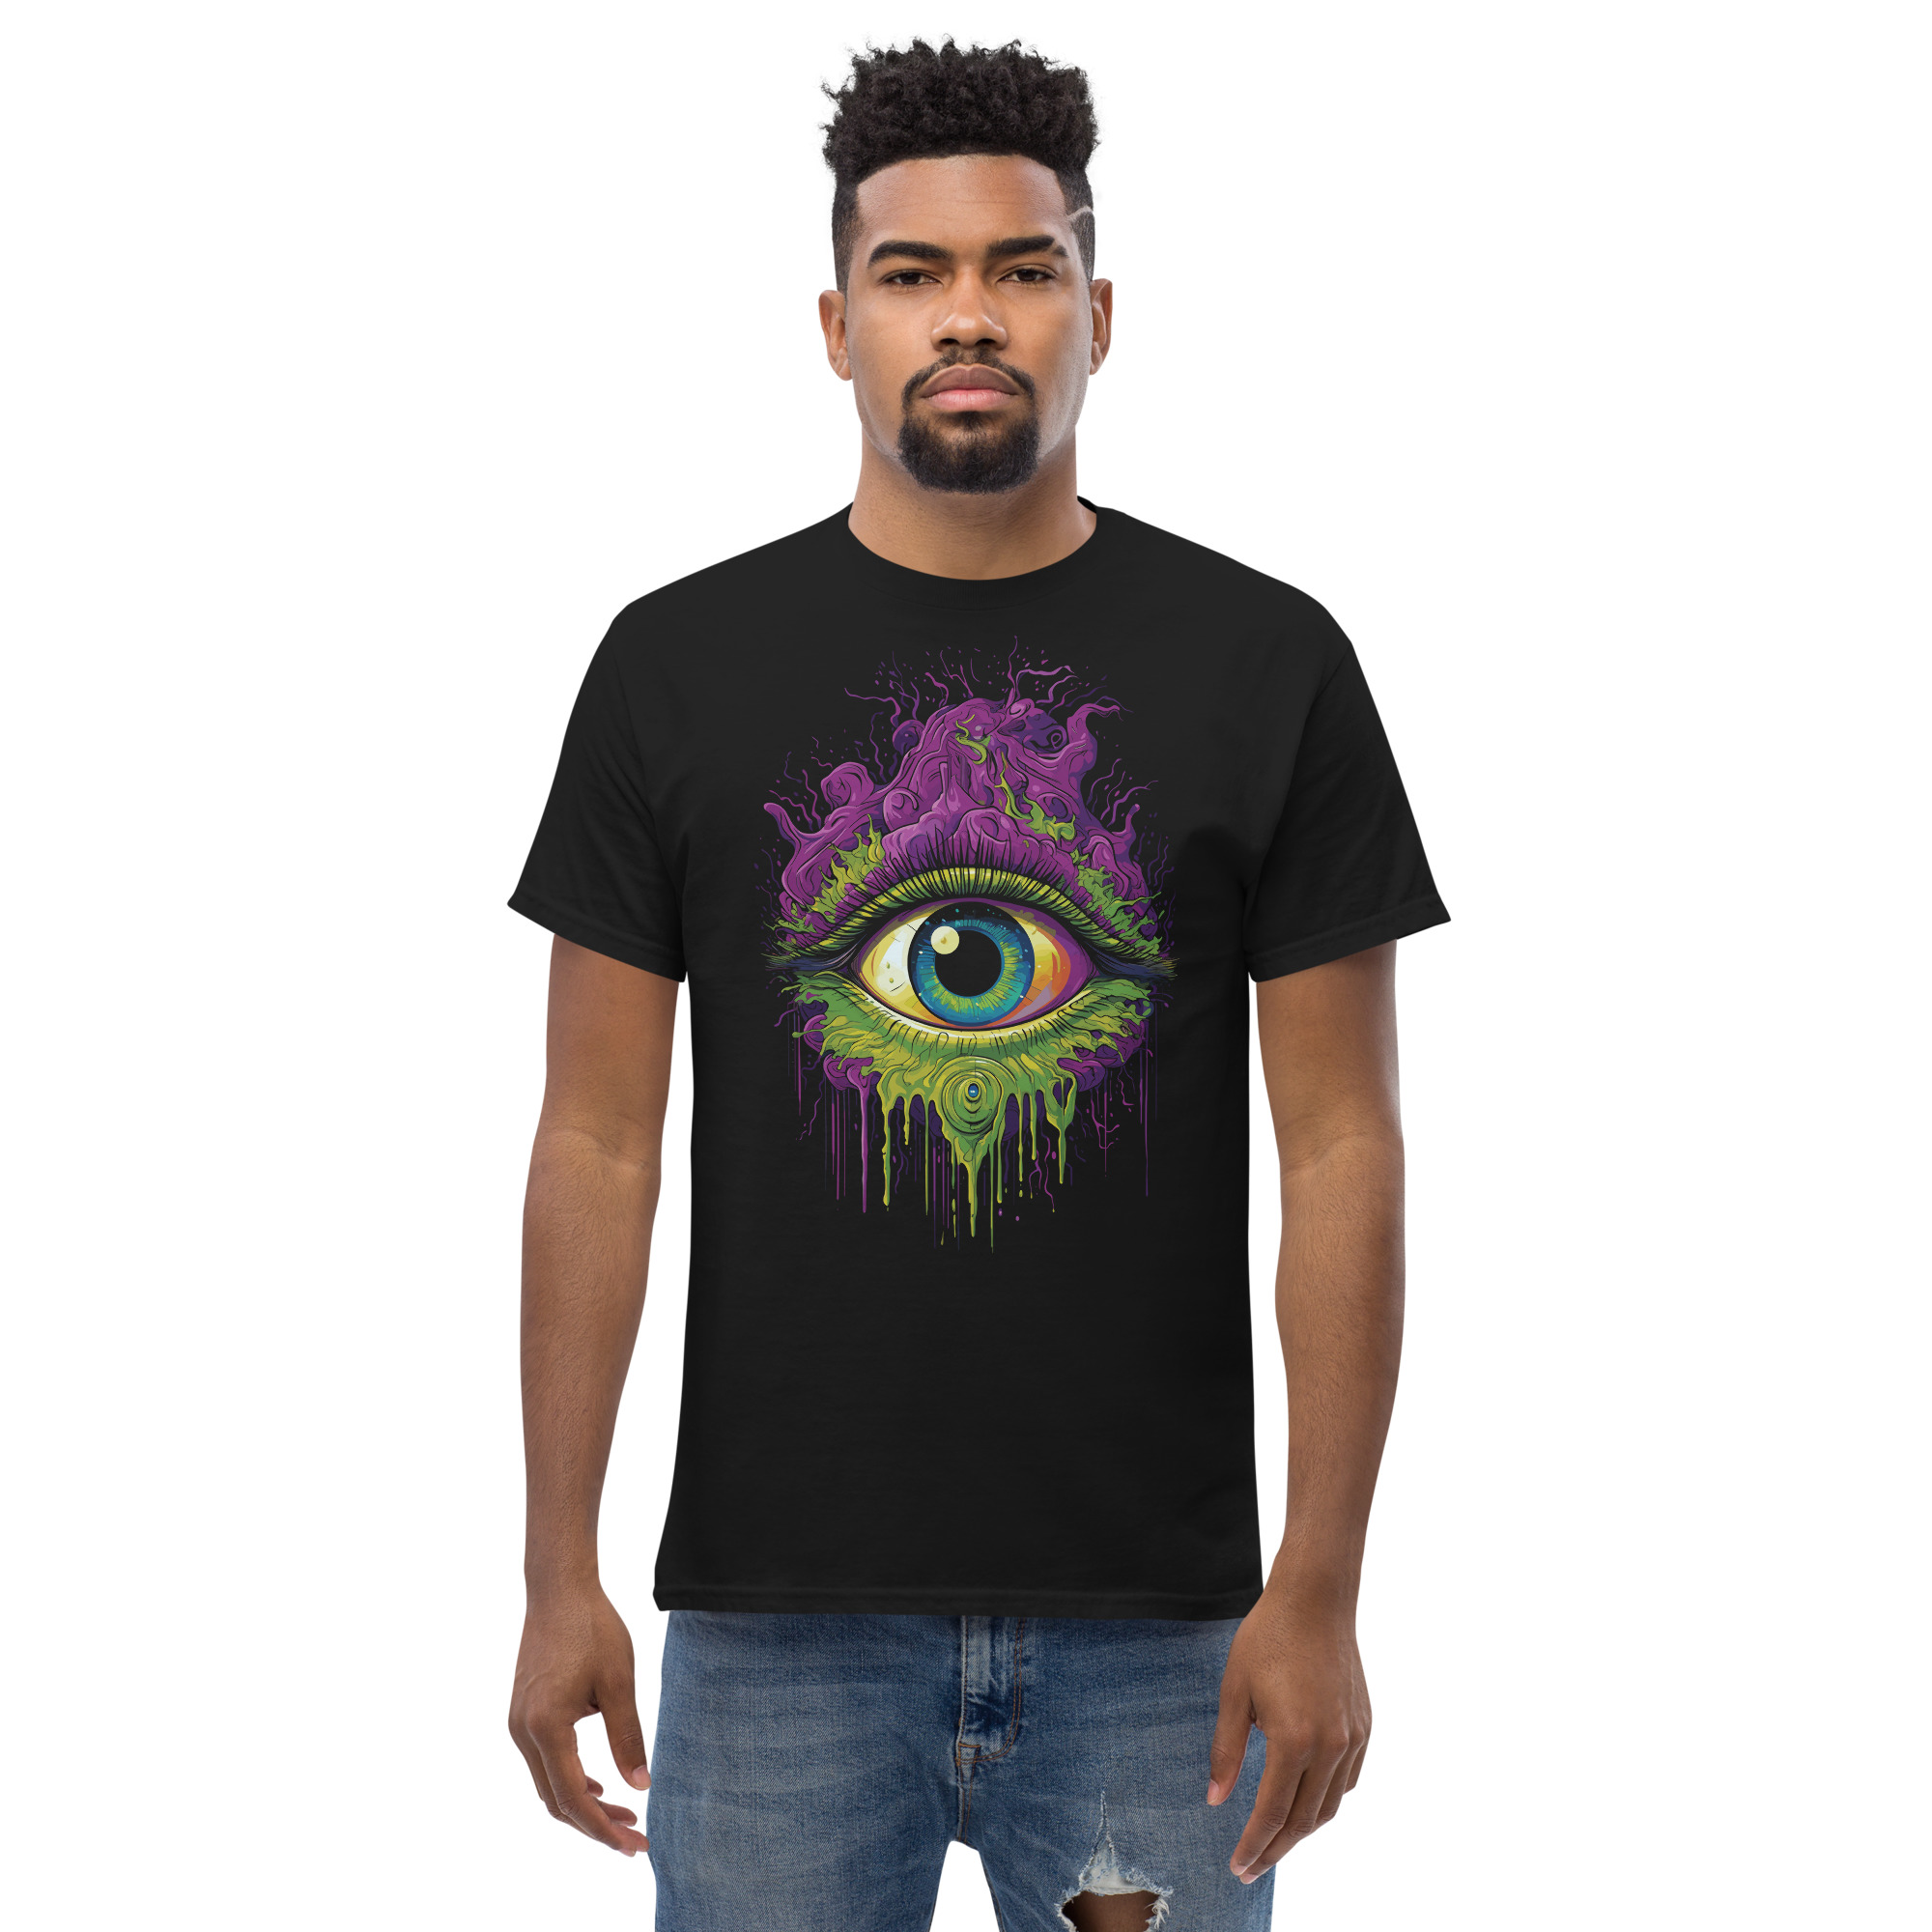 T-shirt – Psychedelic – Visionary Eye Men's Clothing Wearyt